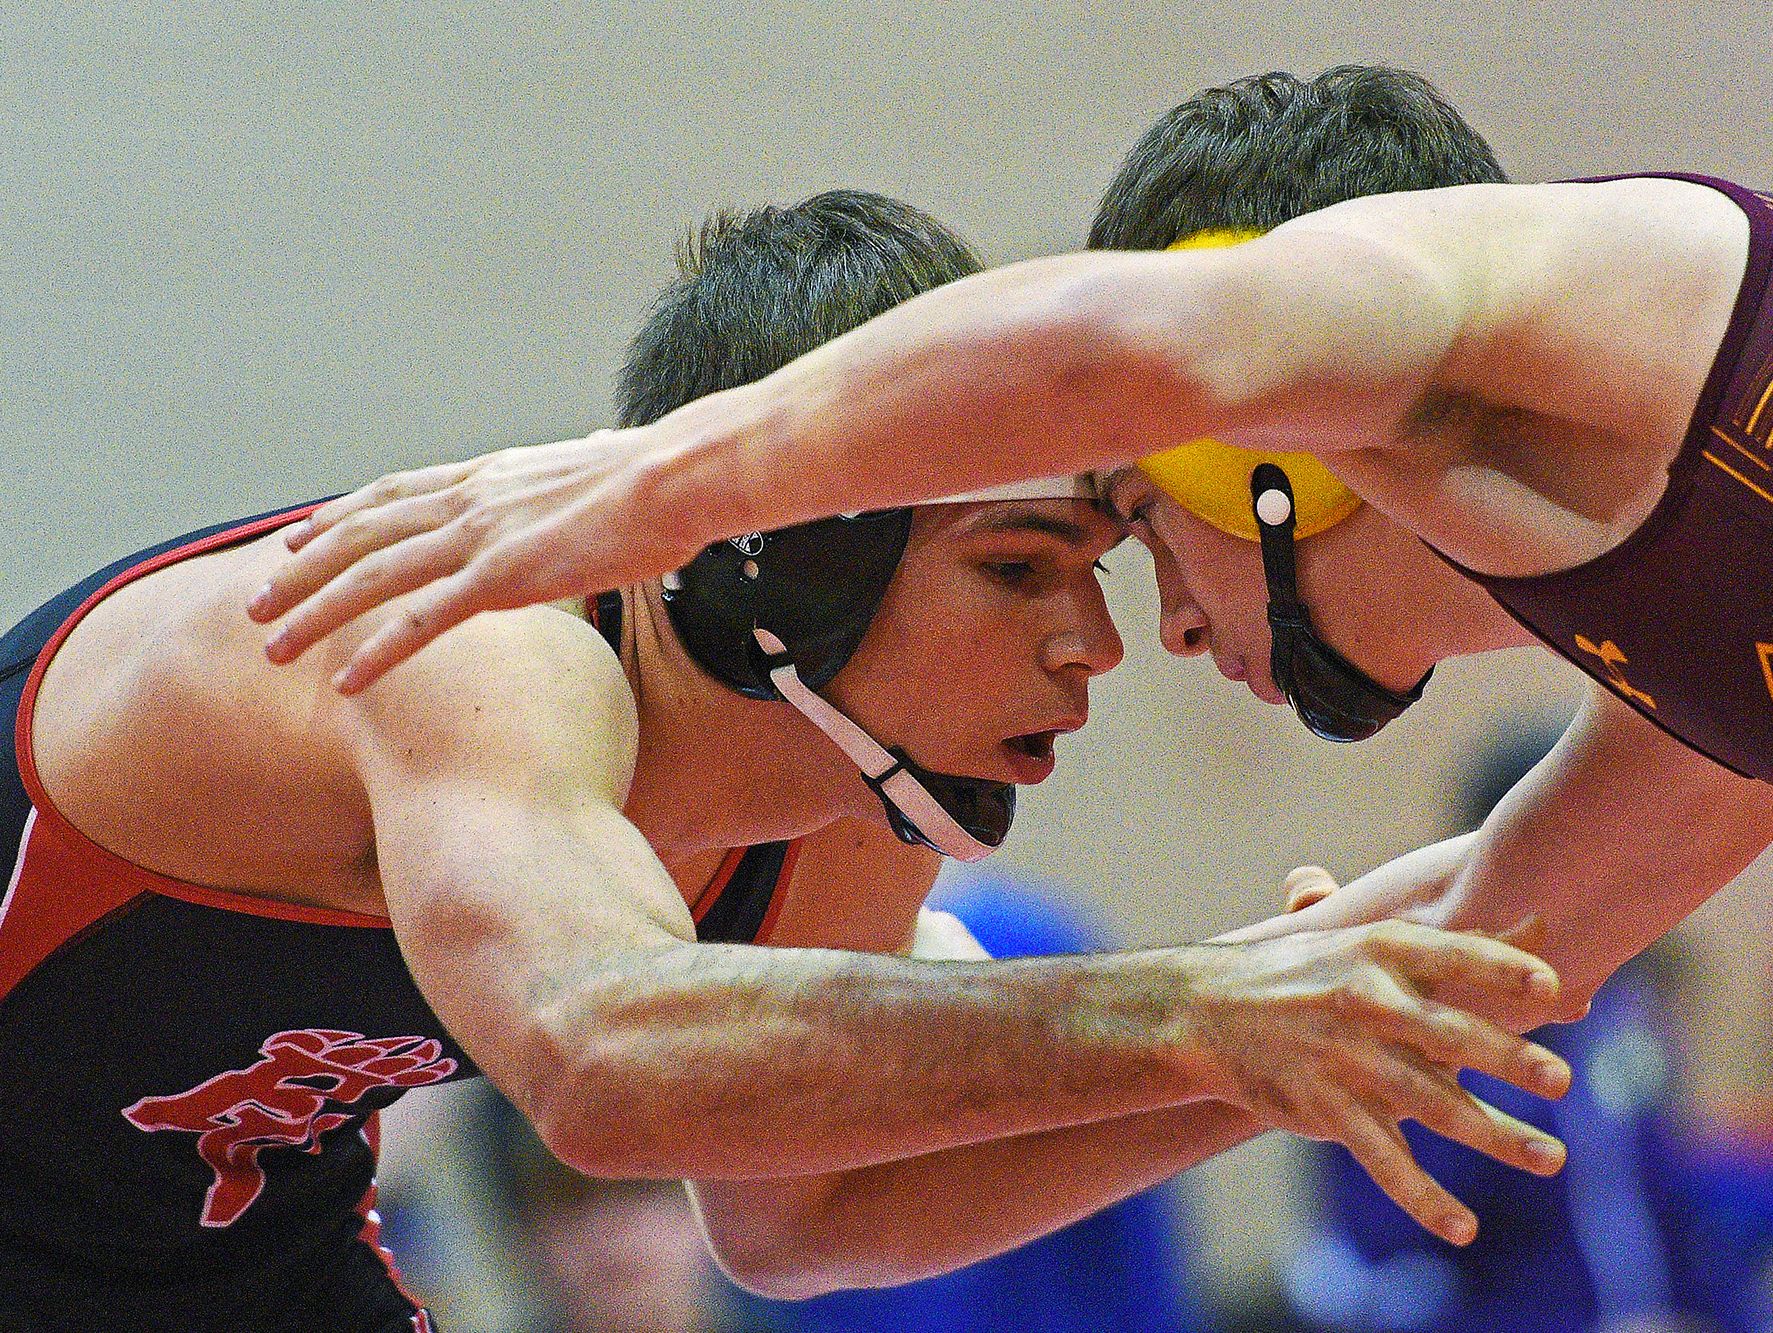 Brandon Valley's Dodge Waldera, left, and Harrisburg's Ryan Meyer wrestle in a 152-pound weight class match during the Floyd Farrand Holiday Wrestling Tournament Thursday, Dec. 29, 2016, at Lincoln High School in Sioux Falls.